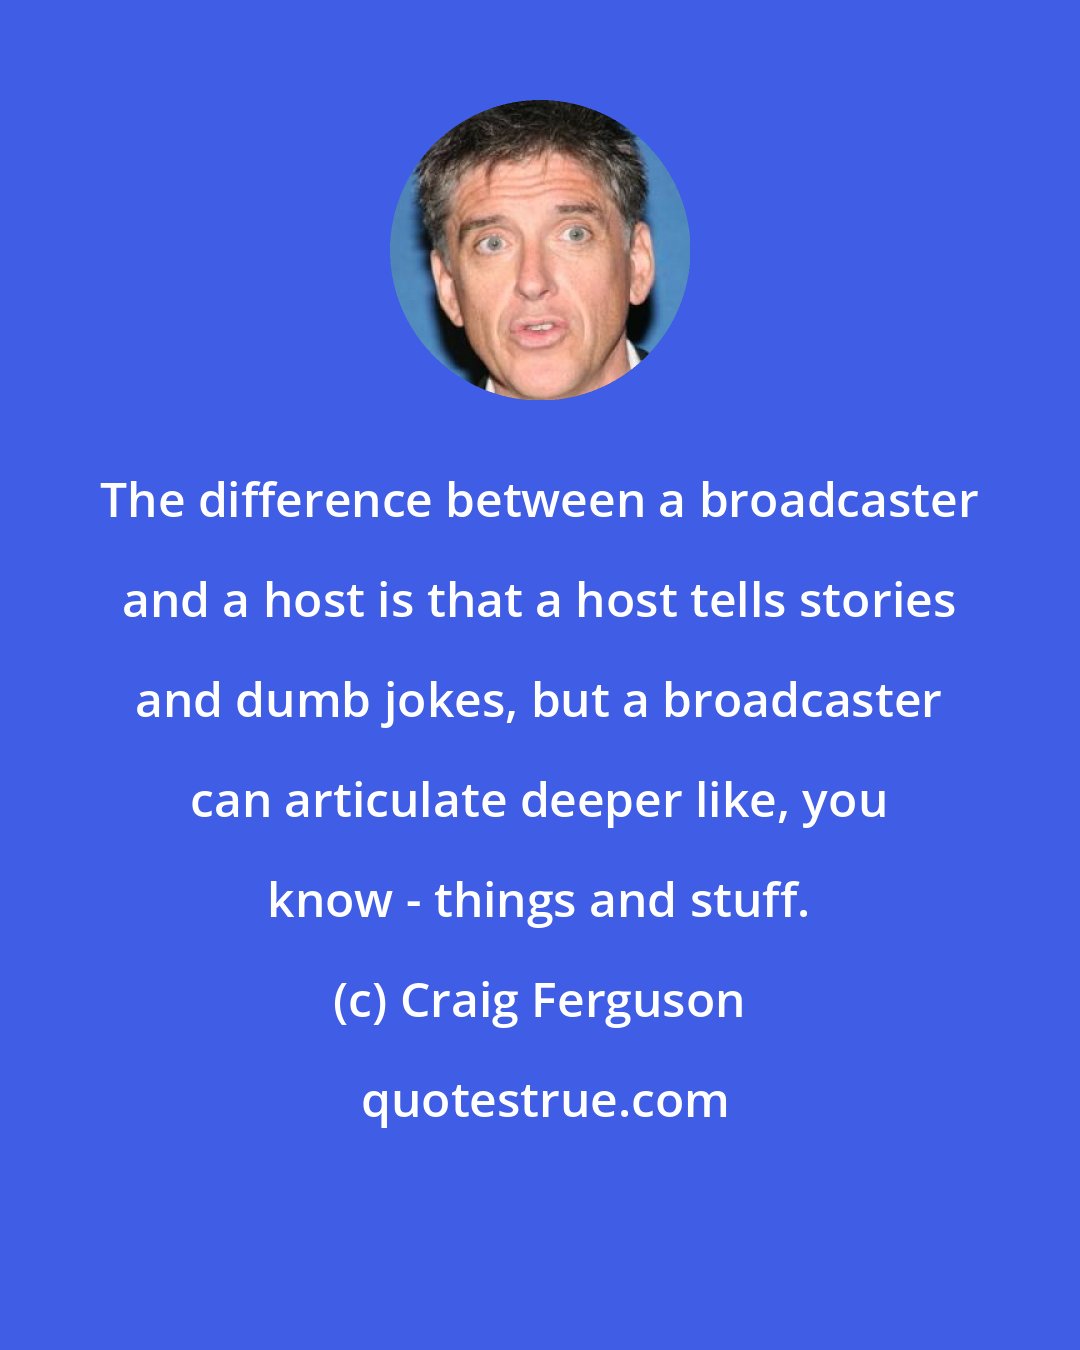 Craig Ferguson: The difference between a broadcaster and a host is that a host tells stories and dumb jokes, but a broadcaster can articulate deeper like, you know - things and stuff.